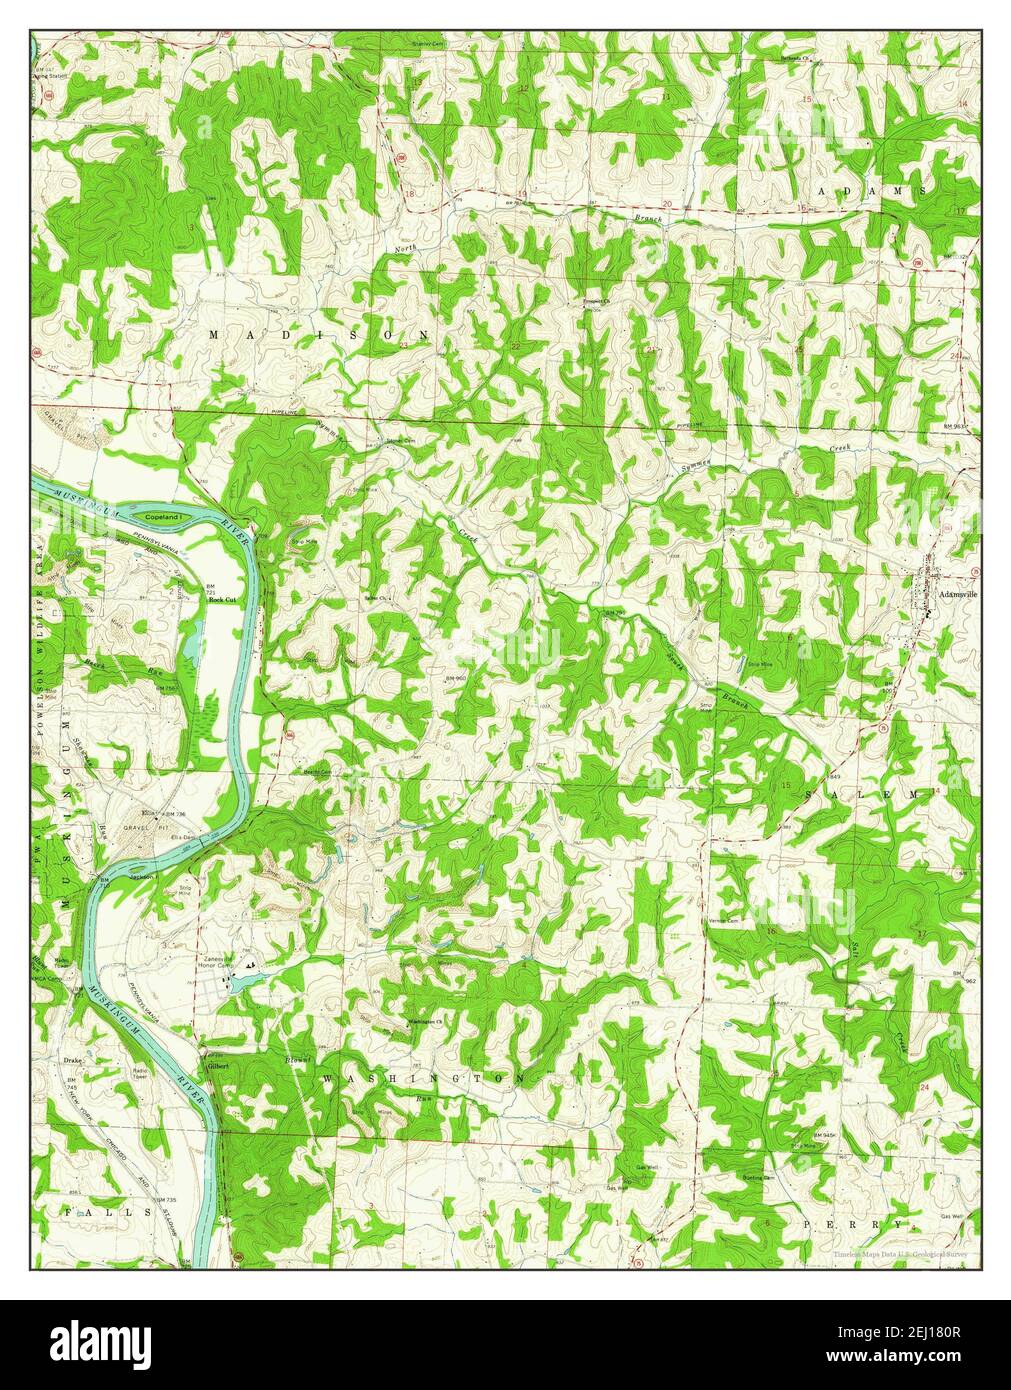 Adamsville, Ohio, map 1962, 1:24000, United States of America by Timeless Maps, data U.S. Geological Survey Stock Photo